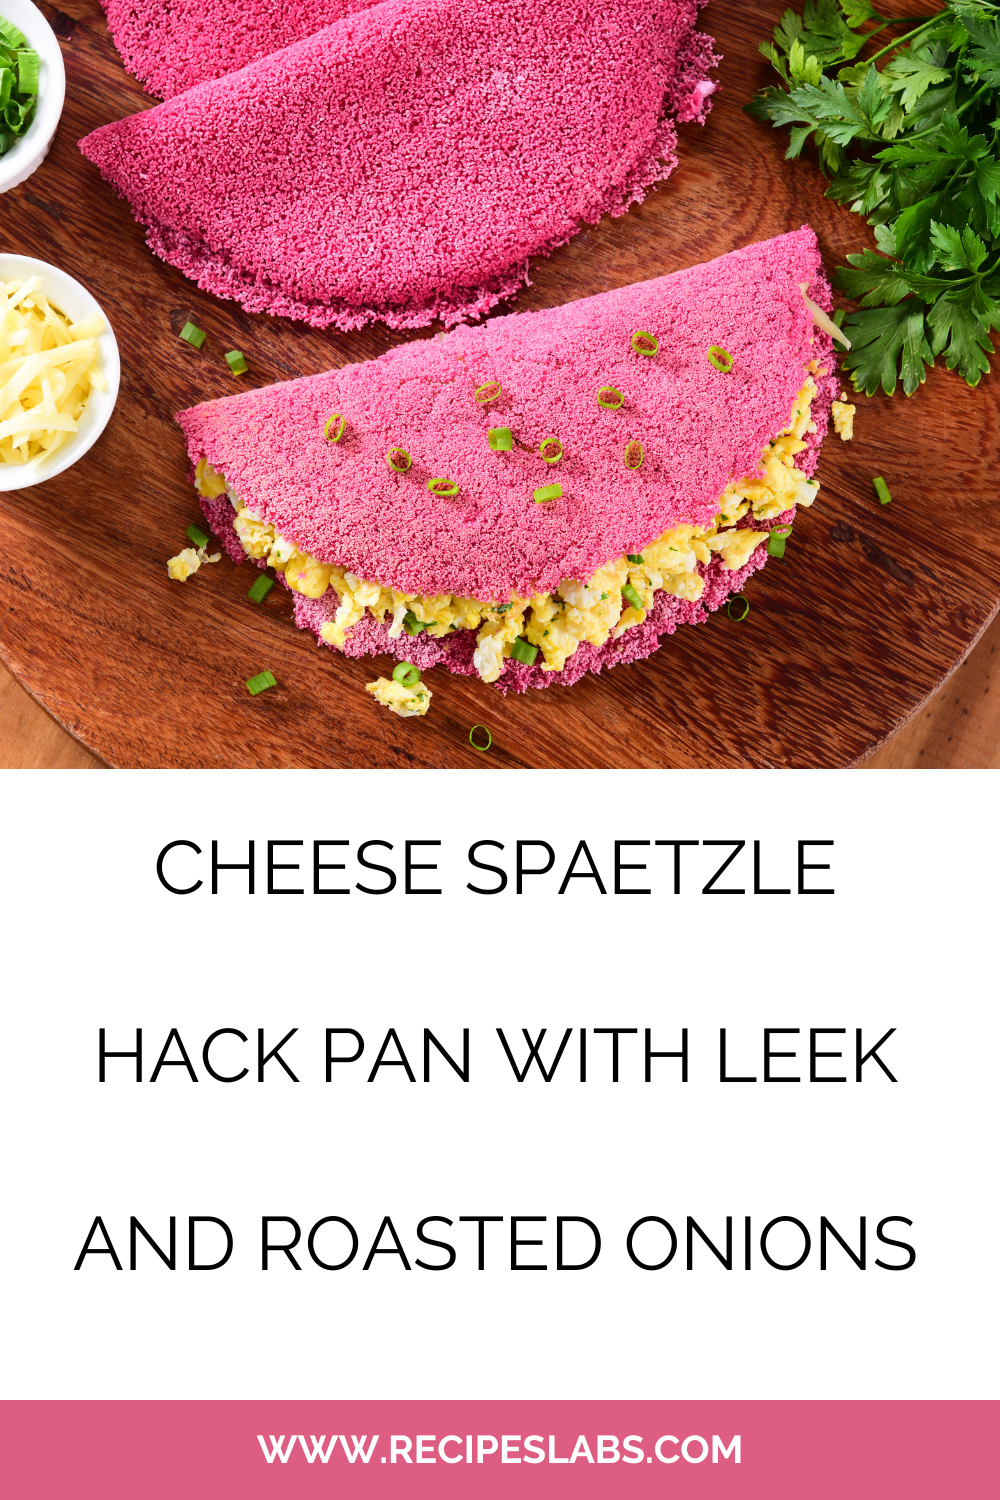 Cheese Spaetzle Hack Pan With Leek And Roasted Onions